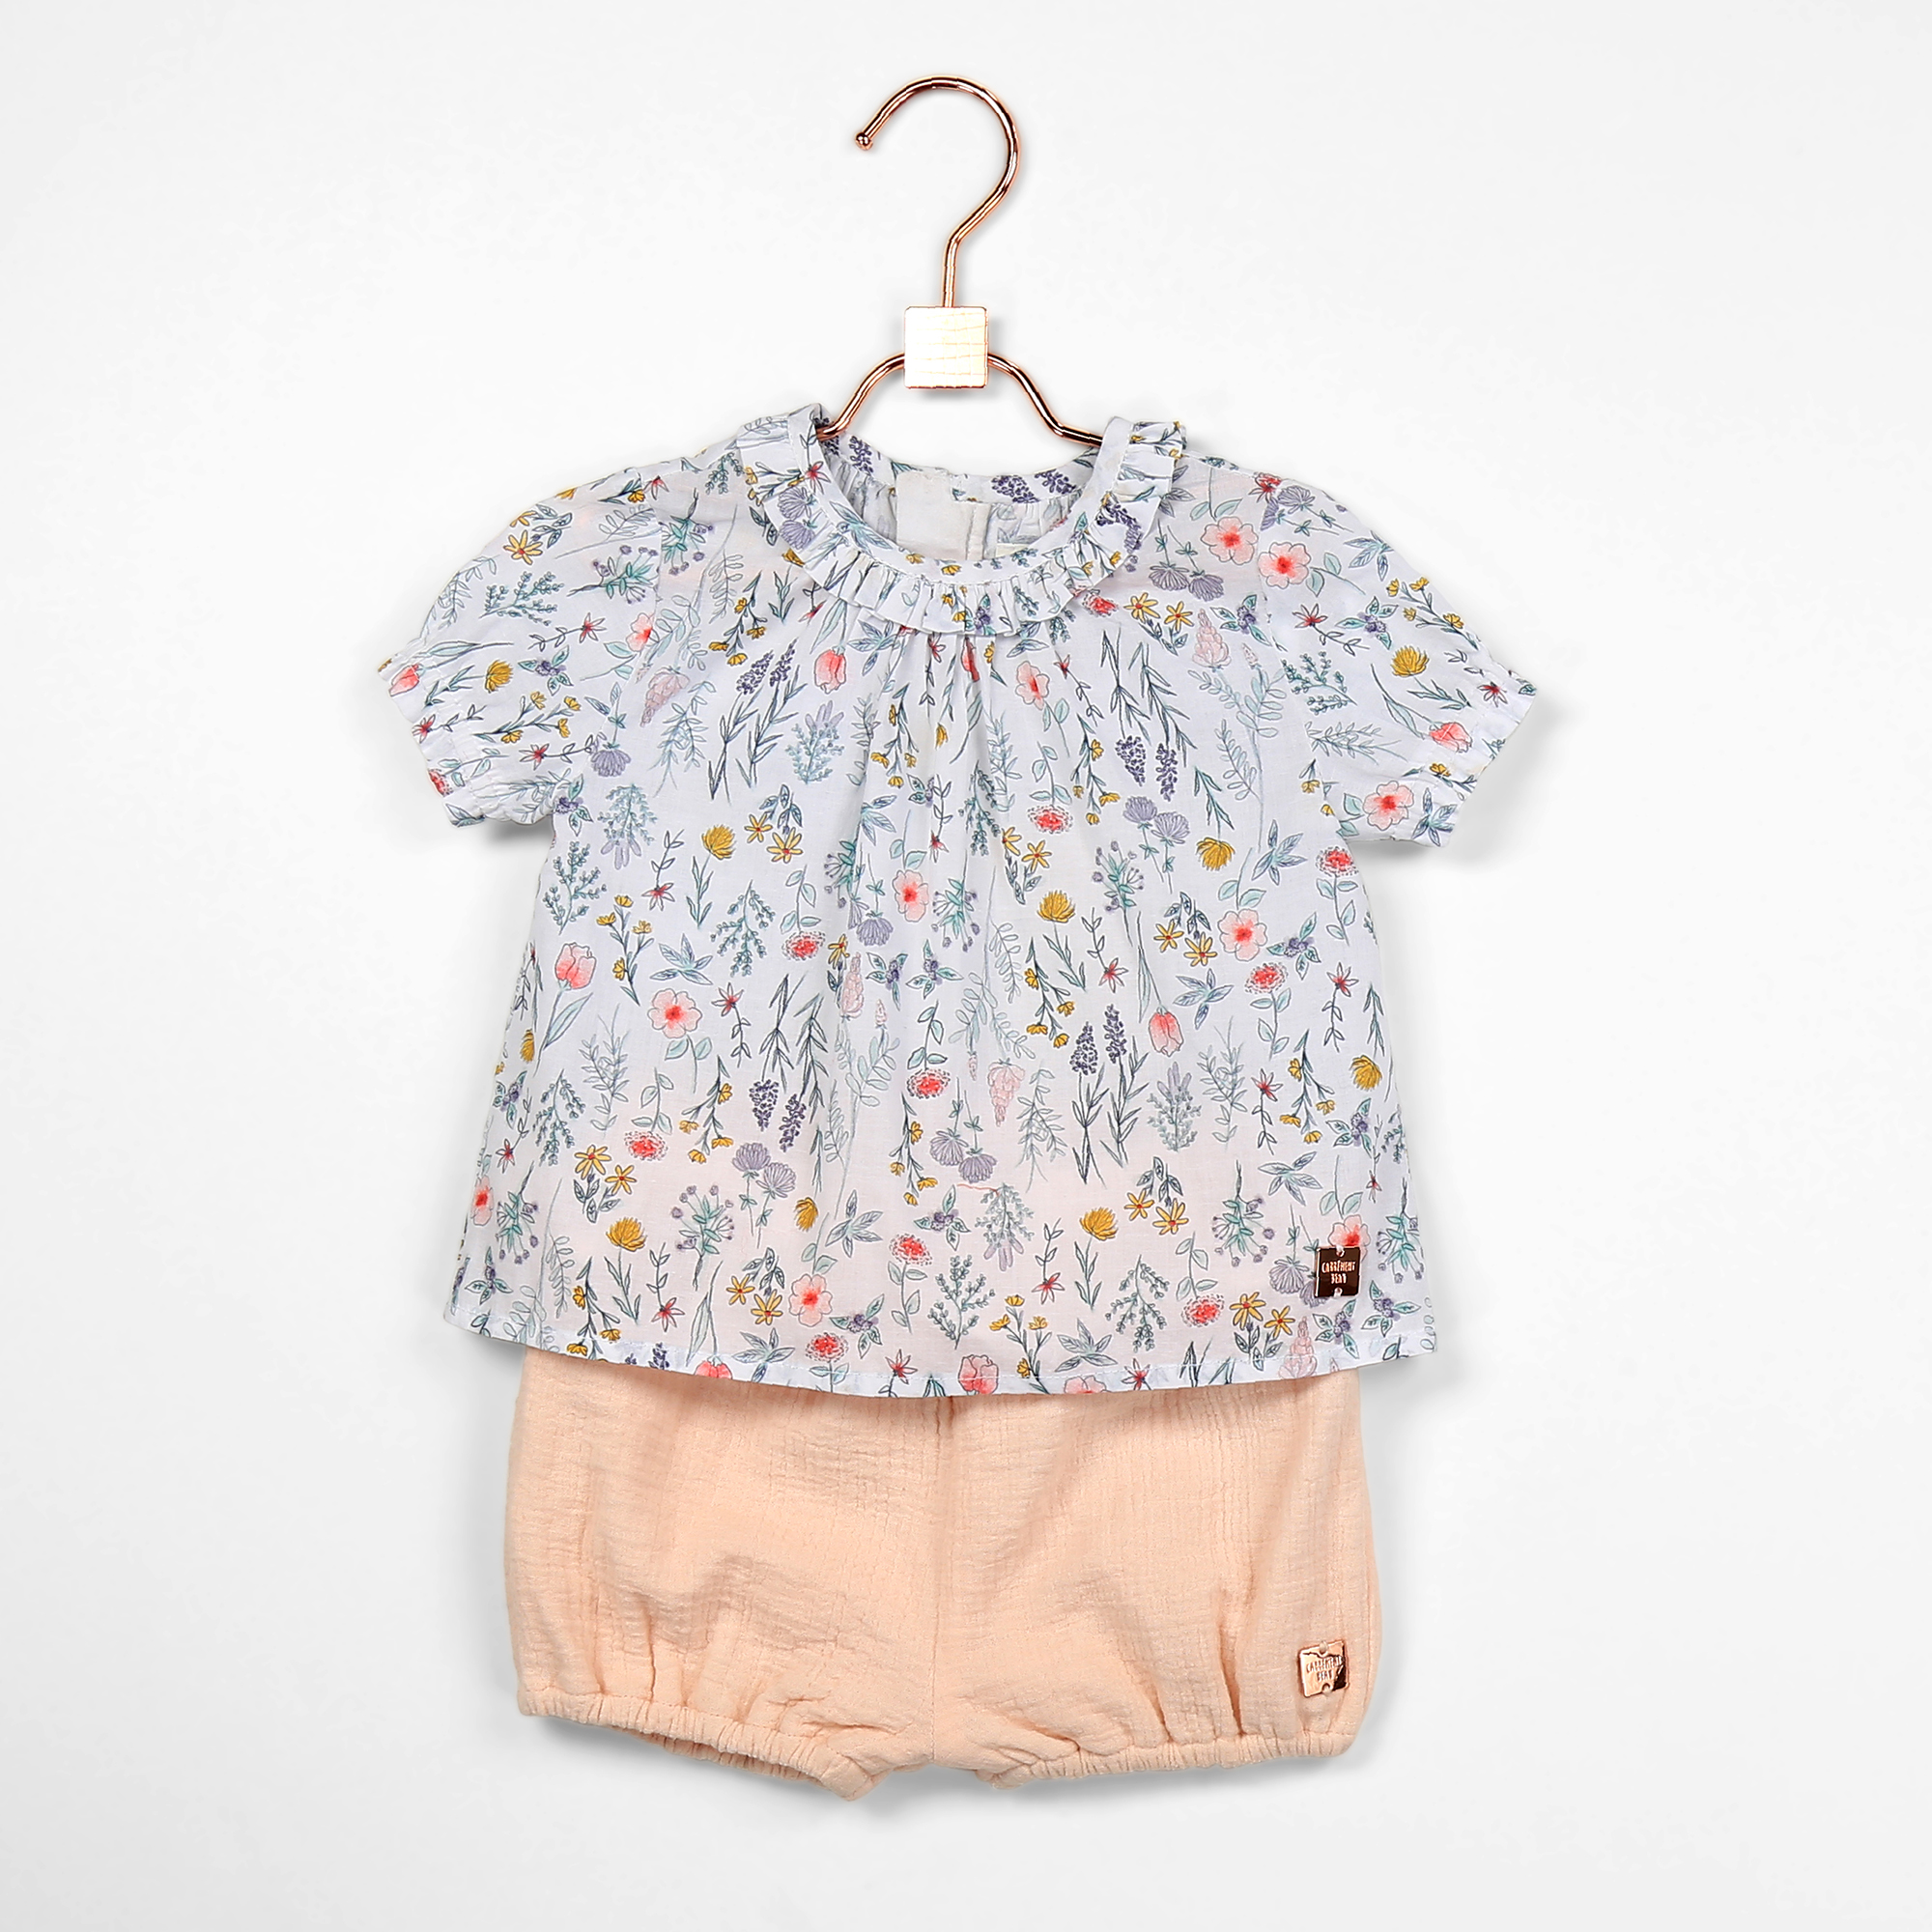 Waffled cotton shorts CARREMENT BEAU for GIRL